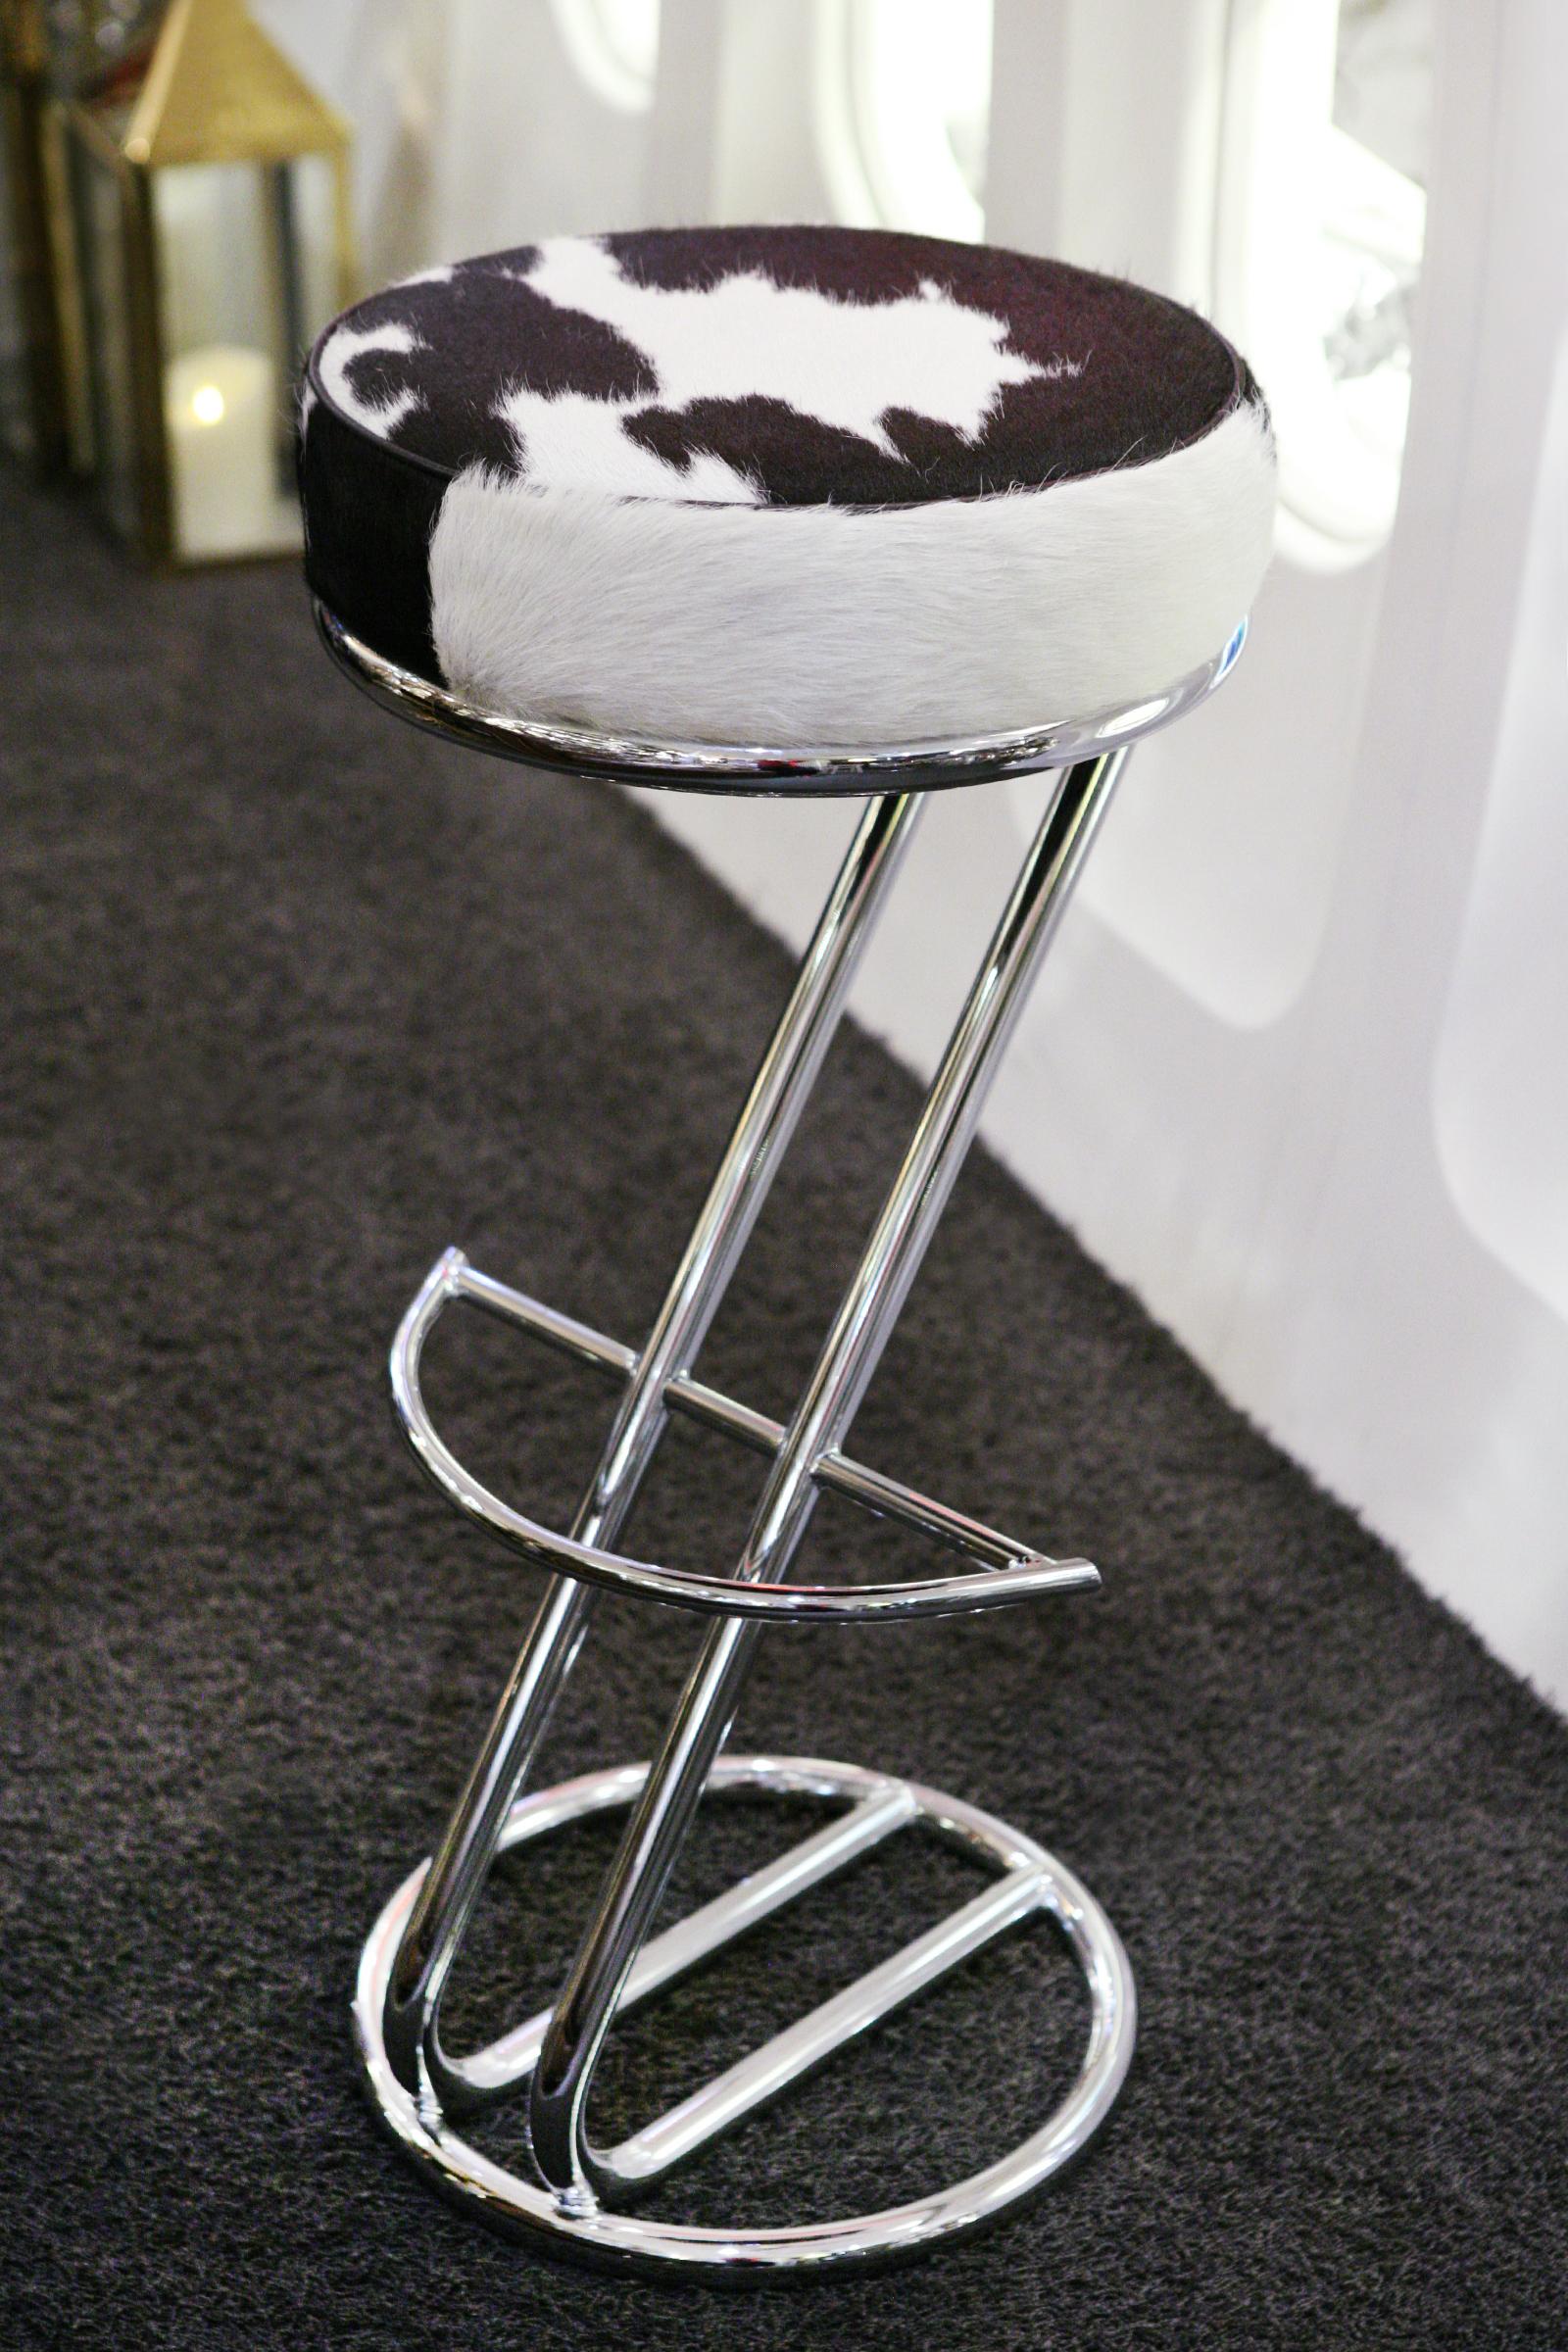 Bar stool pony 1 upholstered and covered with natural
pony on polished stainless steel base. With footrest.
  